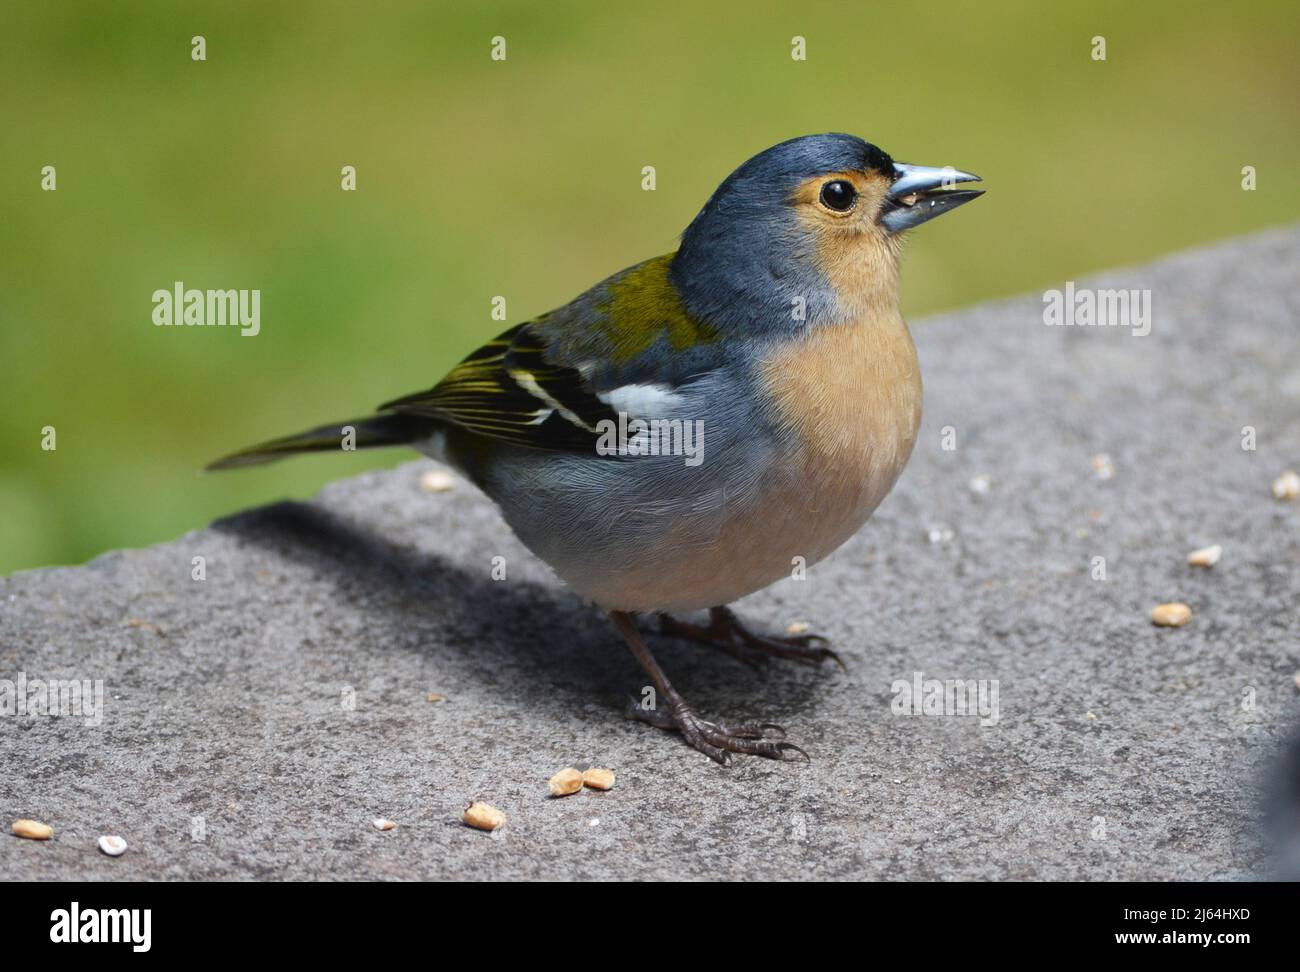 Madeiran chaffinch (Fringilla coelebs madeirensis), a species commonly observed in the laurisilva forest habitat Stock Photo